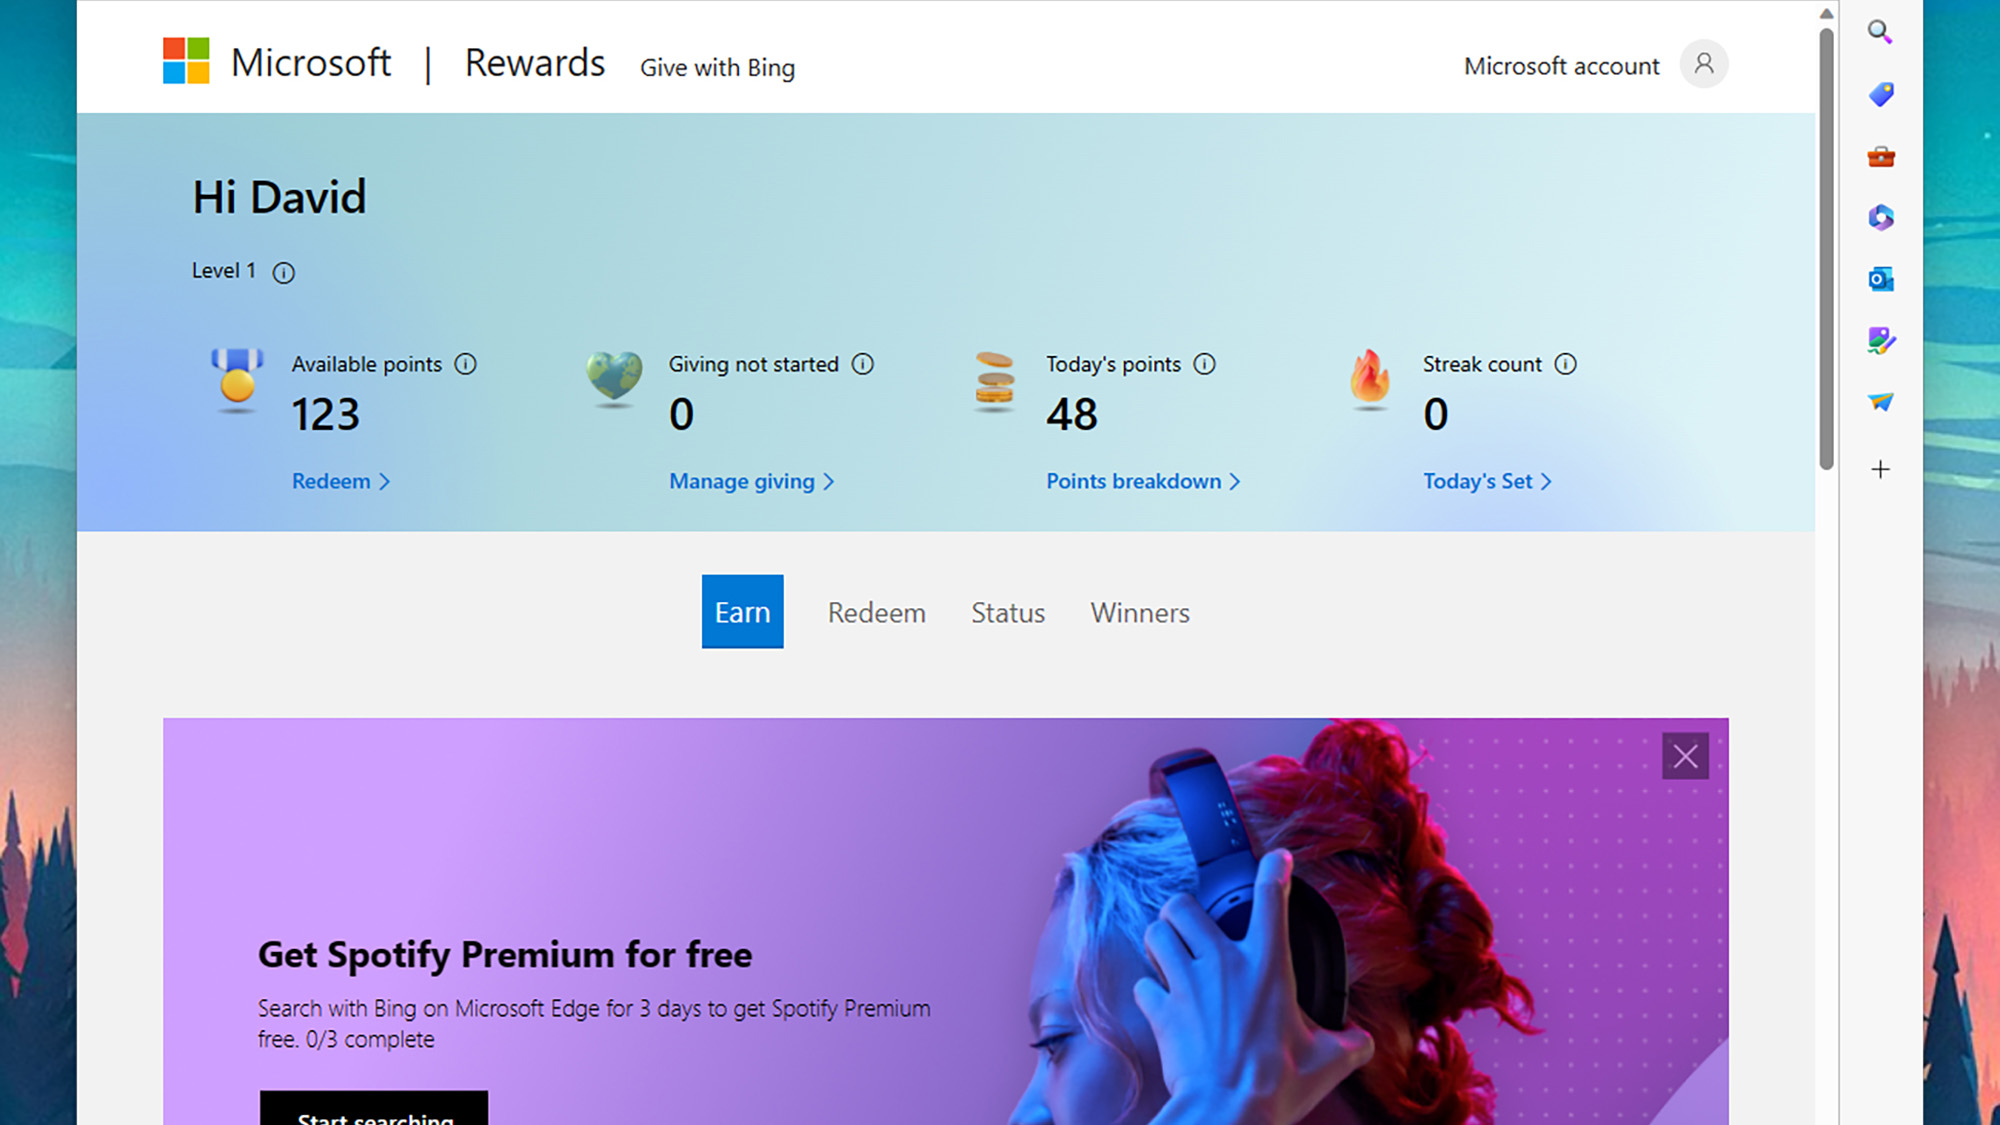 Replying to @odalis basically look up Microsoft rewards sign up and st, Microsoft  Rewards